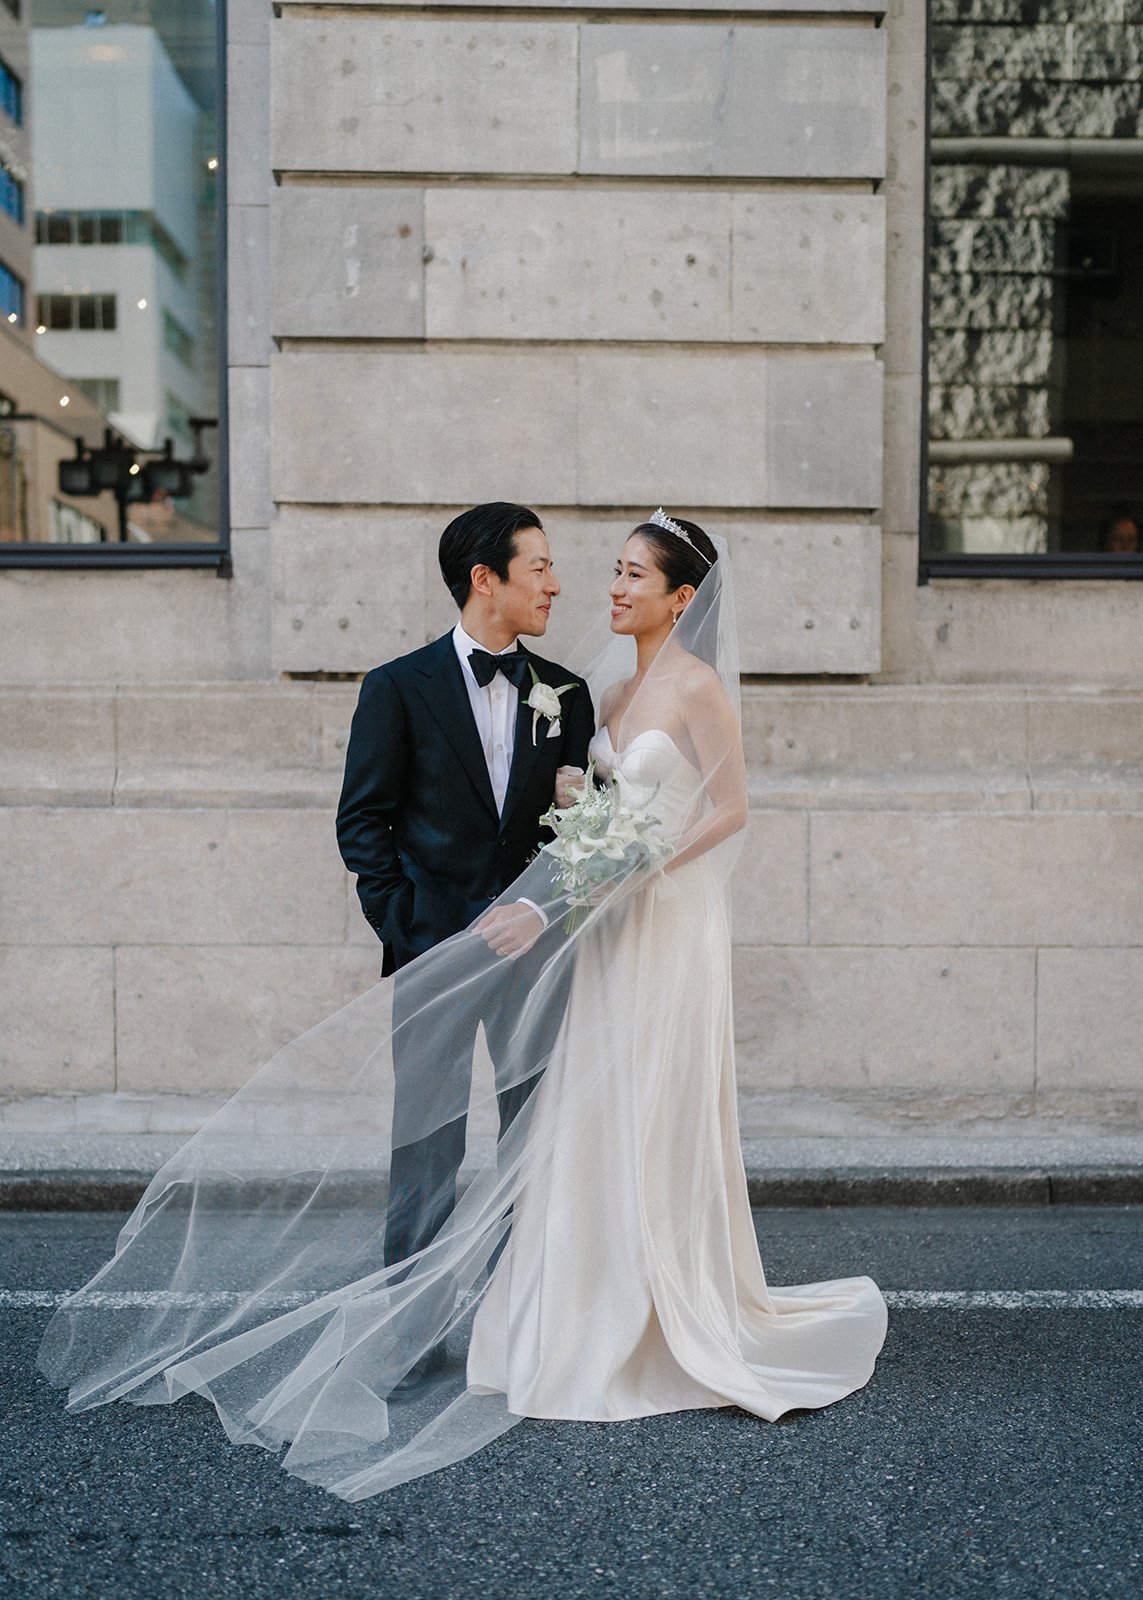  Bride and groom share a moment after their trendy city wedding.  